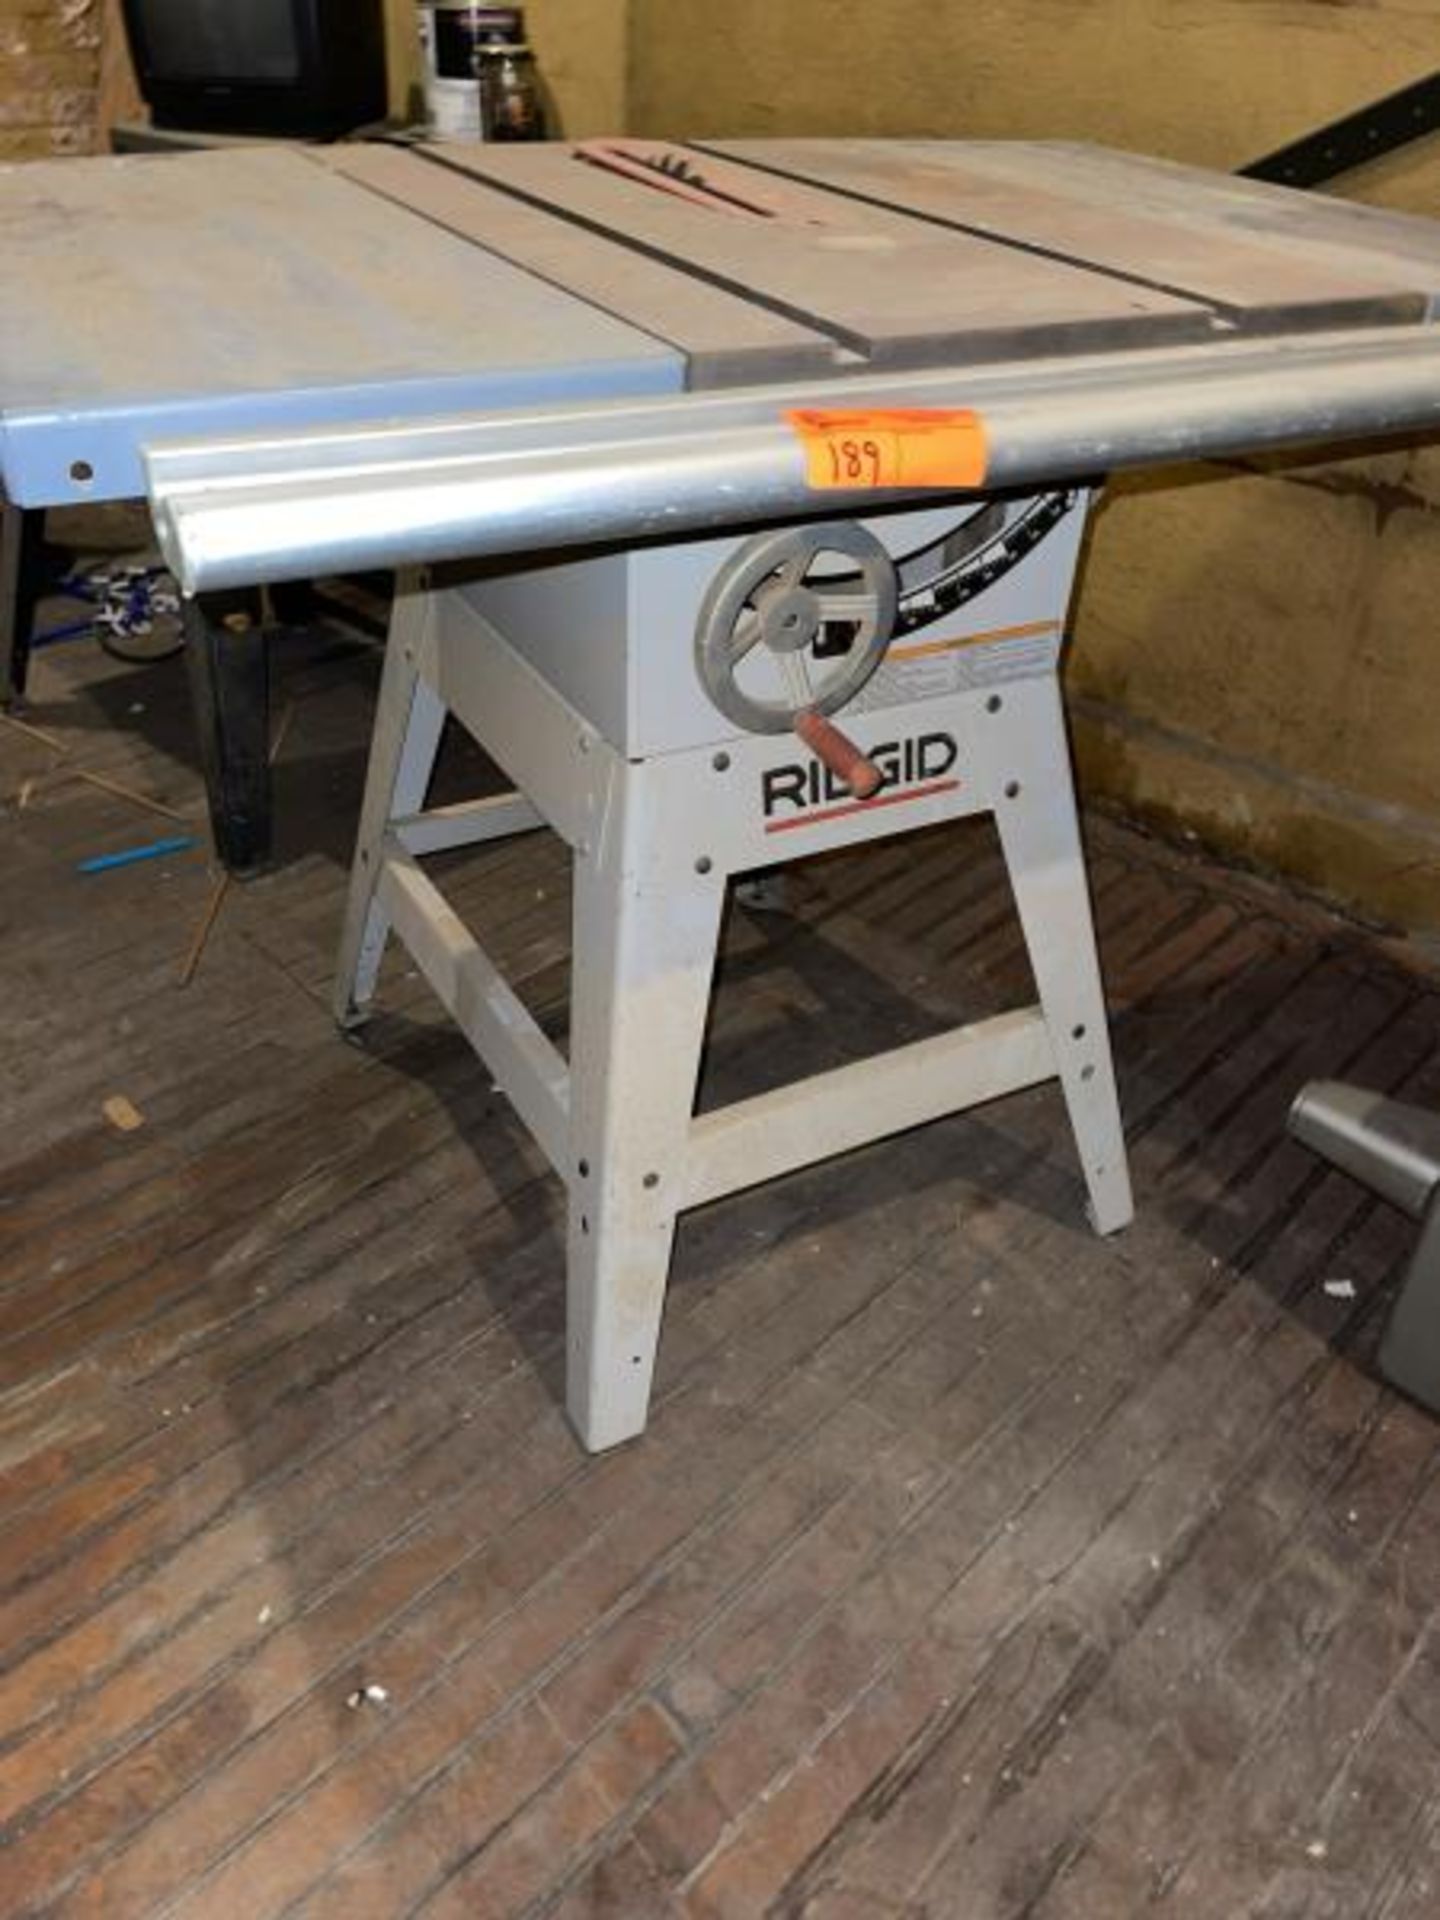 Rigid Table Saw M: TS-241209 On Second Floor Custom Come Down Narrow Staircase, or Hole In Floor - Image 2 of 3